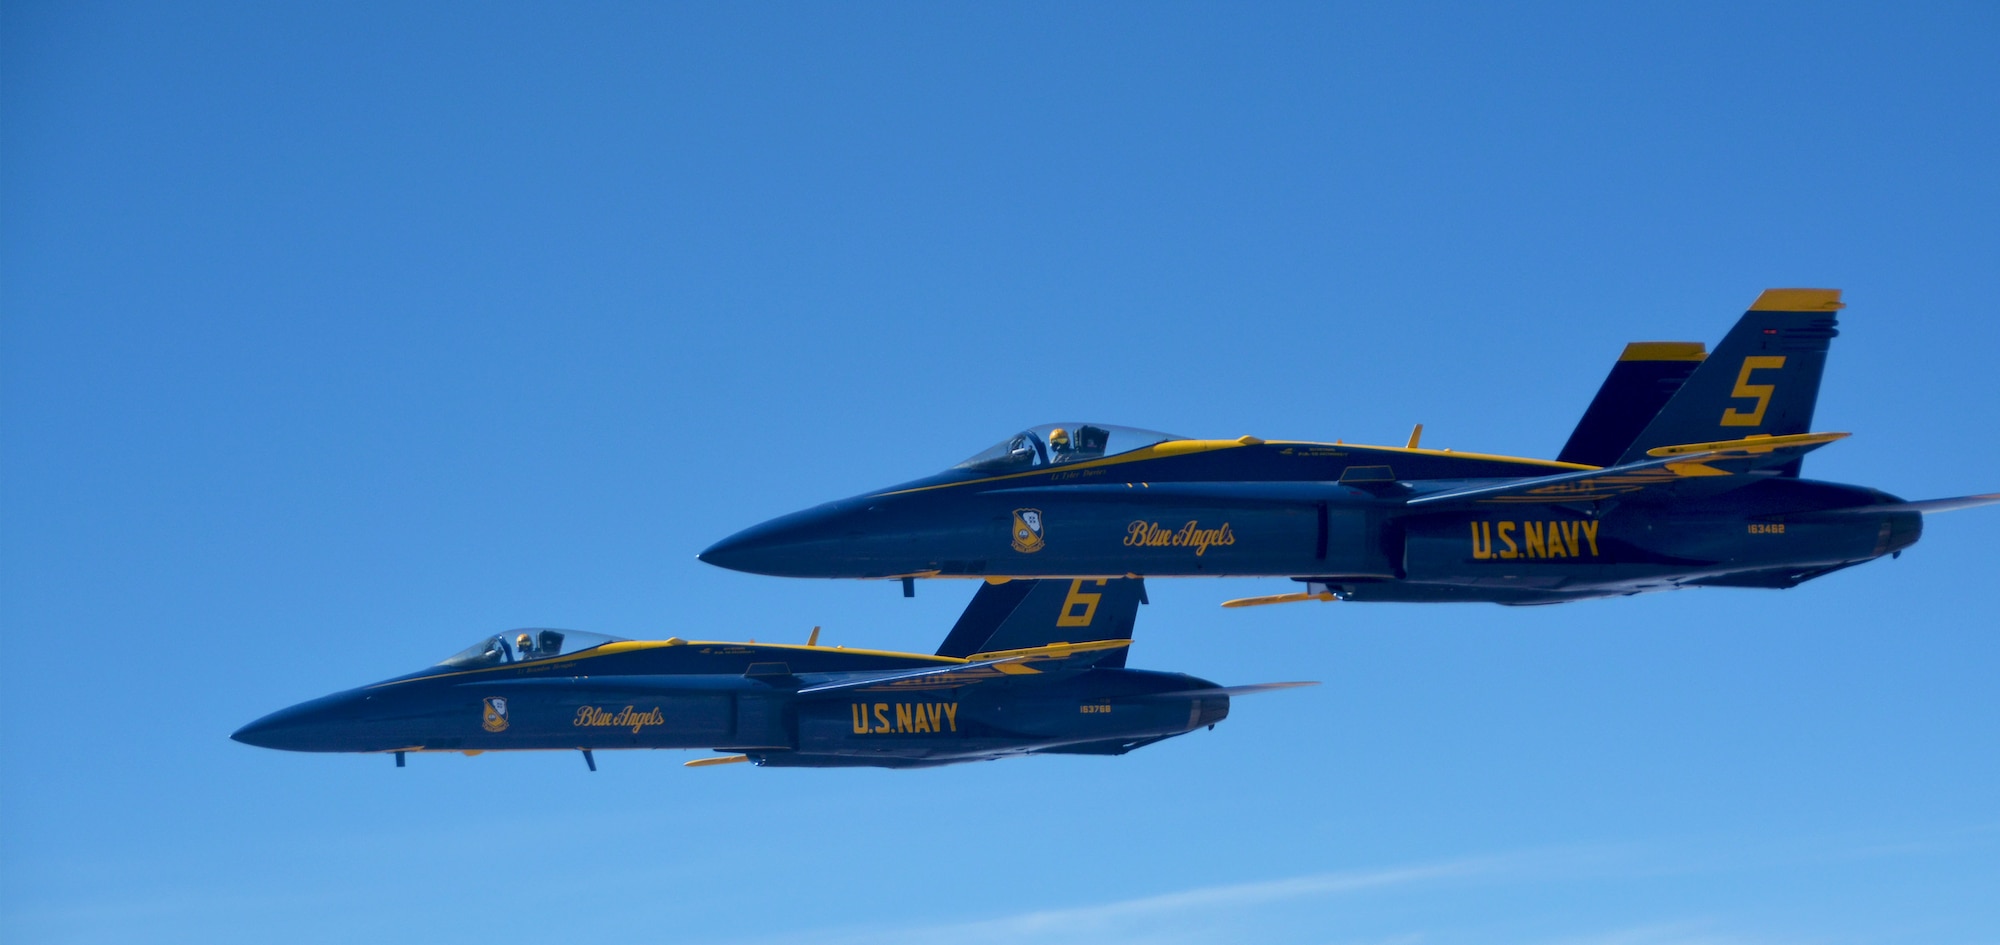 Reserve Citizen Airmen from the 507th Air Refueling Wing at Tinker Air Force Base, Okla., refueled seven F/A-18 Hornets from the U.S. Navy Blue Angels team March 19, 2018. The Blue Angels returned home to Pensacola Naval Air Station, Fla., after three months of training at El Centro Naval Air Facility, Calif. (U.S. Air Force photo/Tech. Sgt. Samantha Mathison)